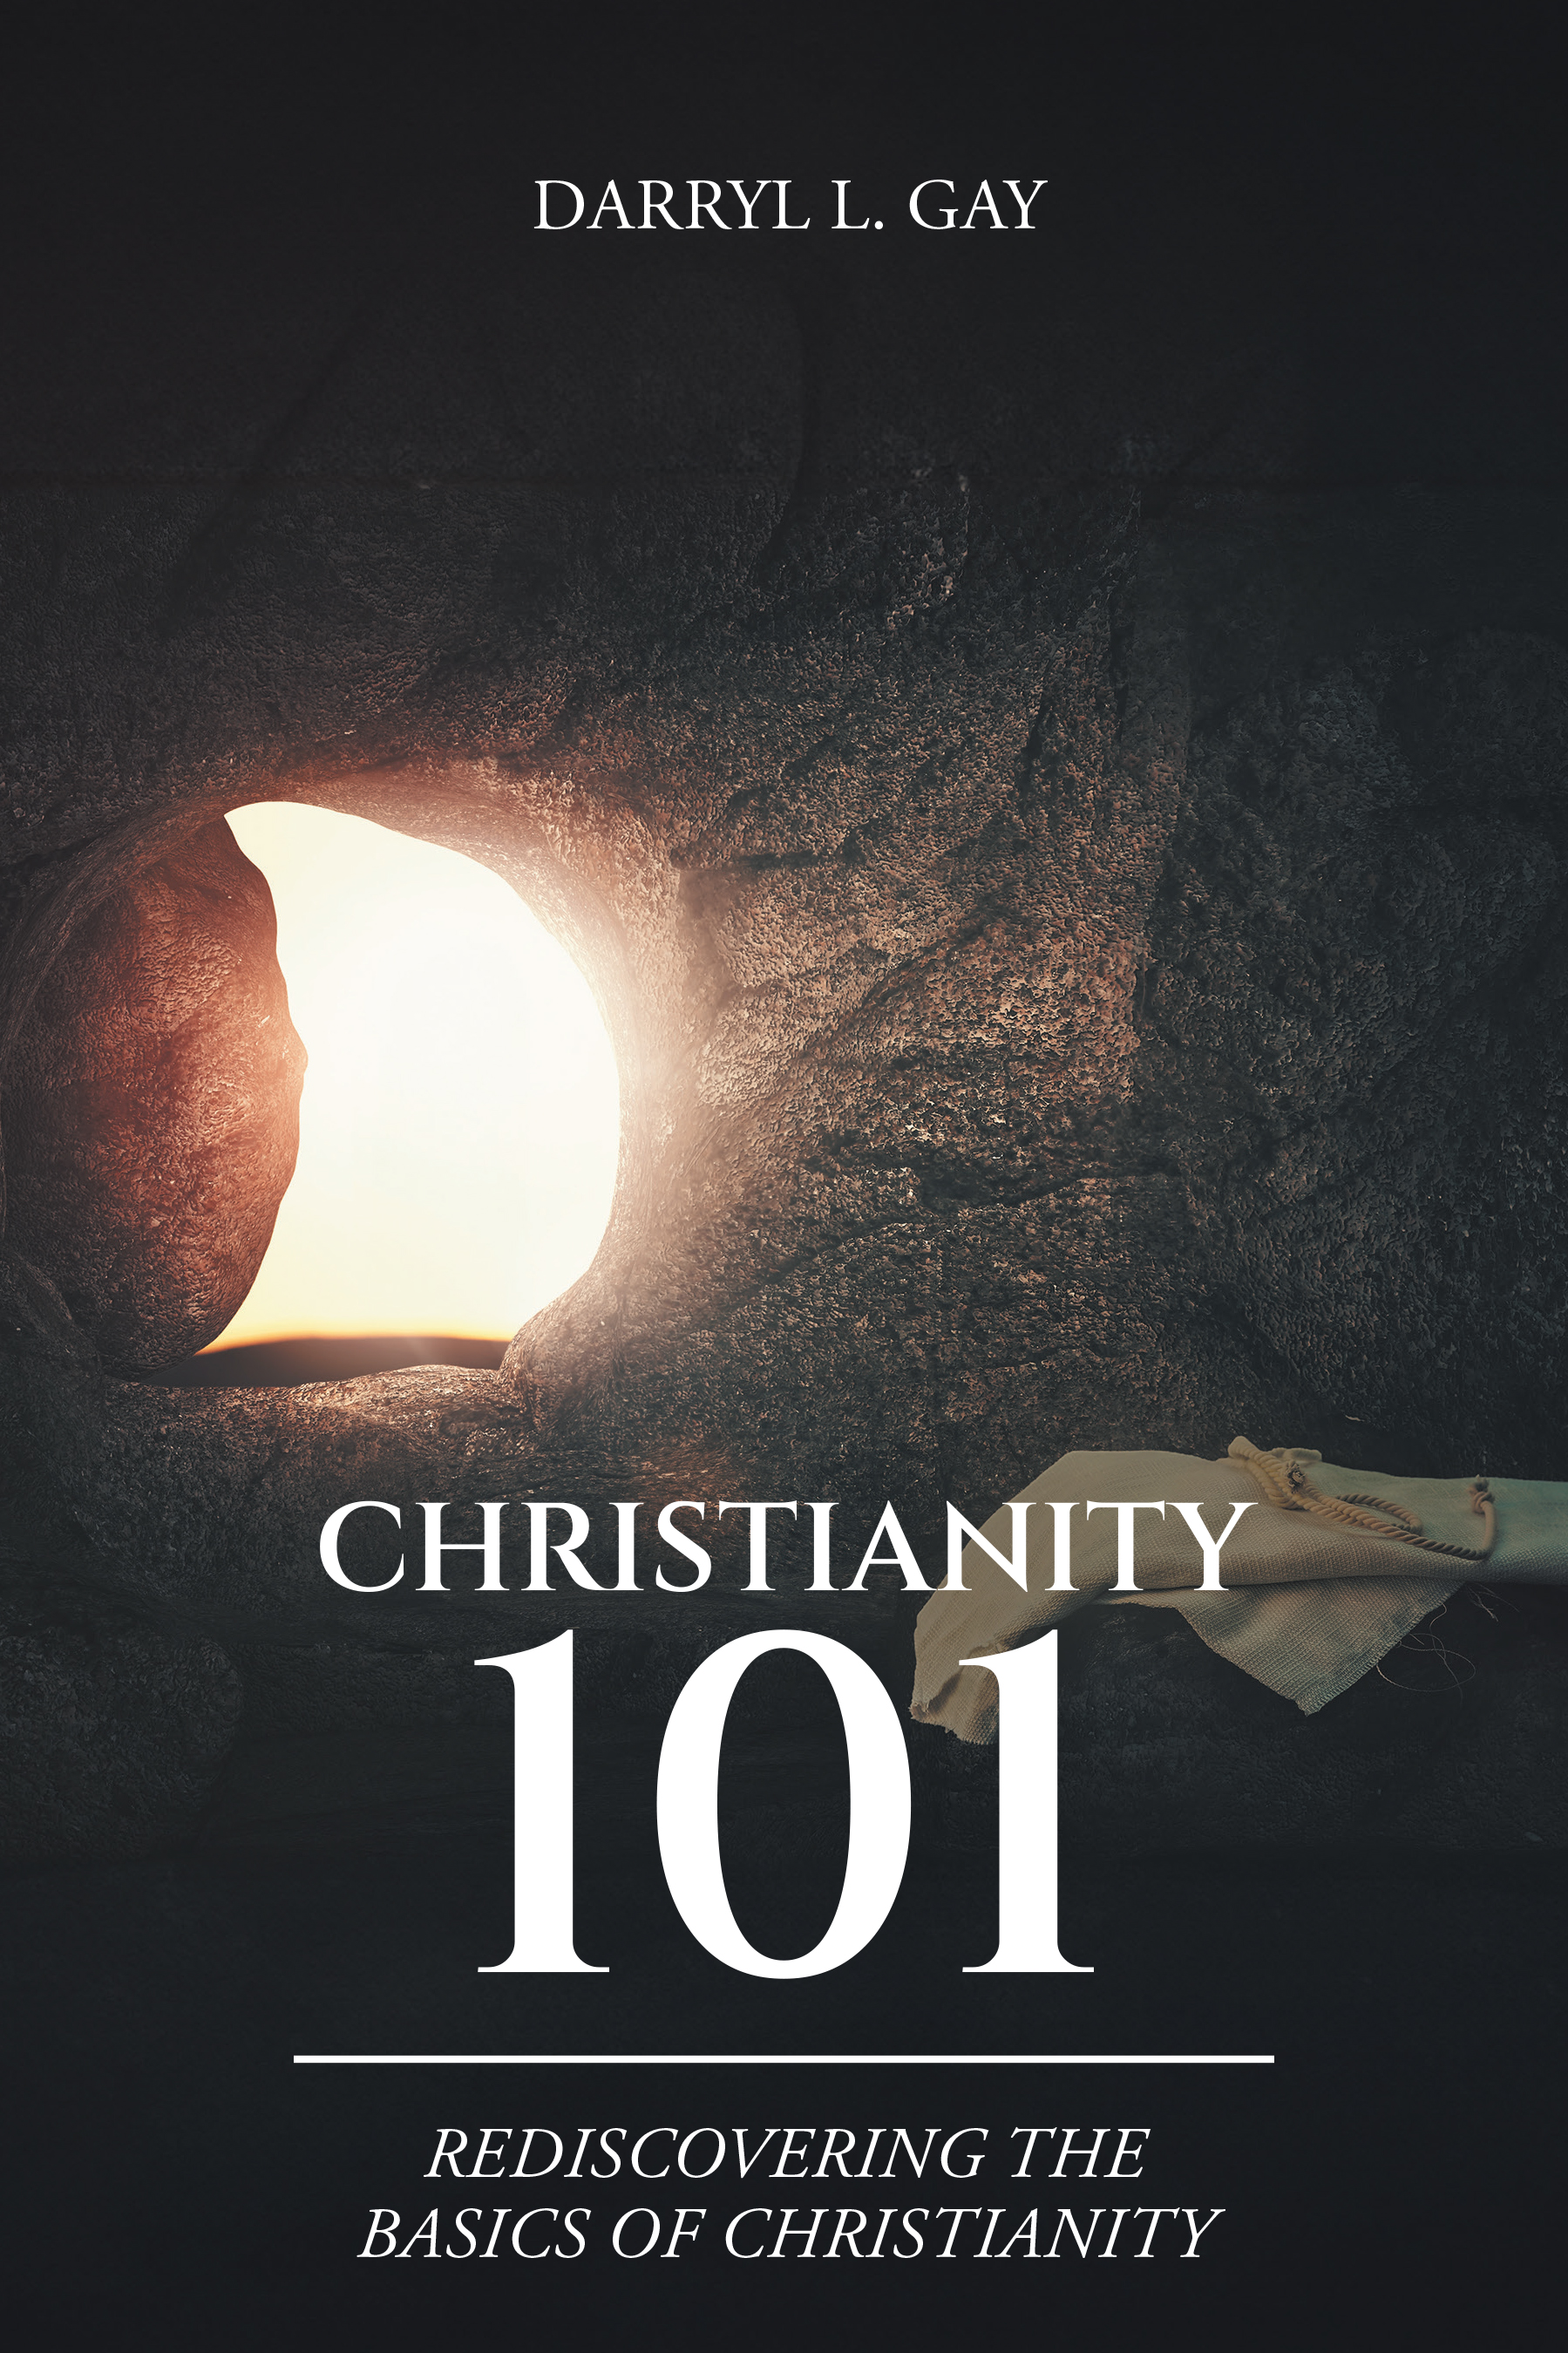 Darryl L. Gay’s Newly Released "Christianity 101: Rediscovering the Basics of Christianity" is an Illuminating Guide to Foundational Christian Teachings